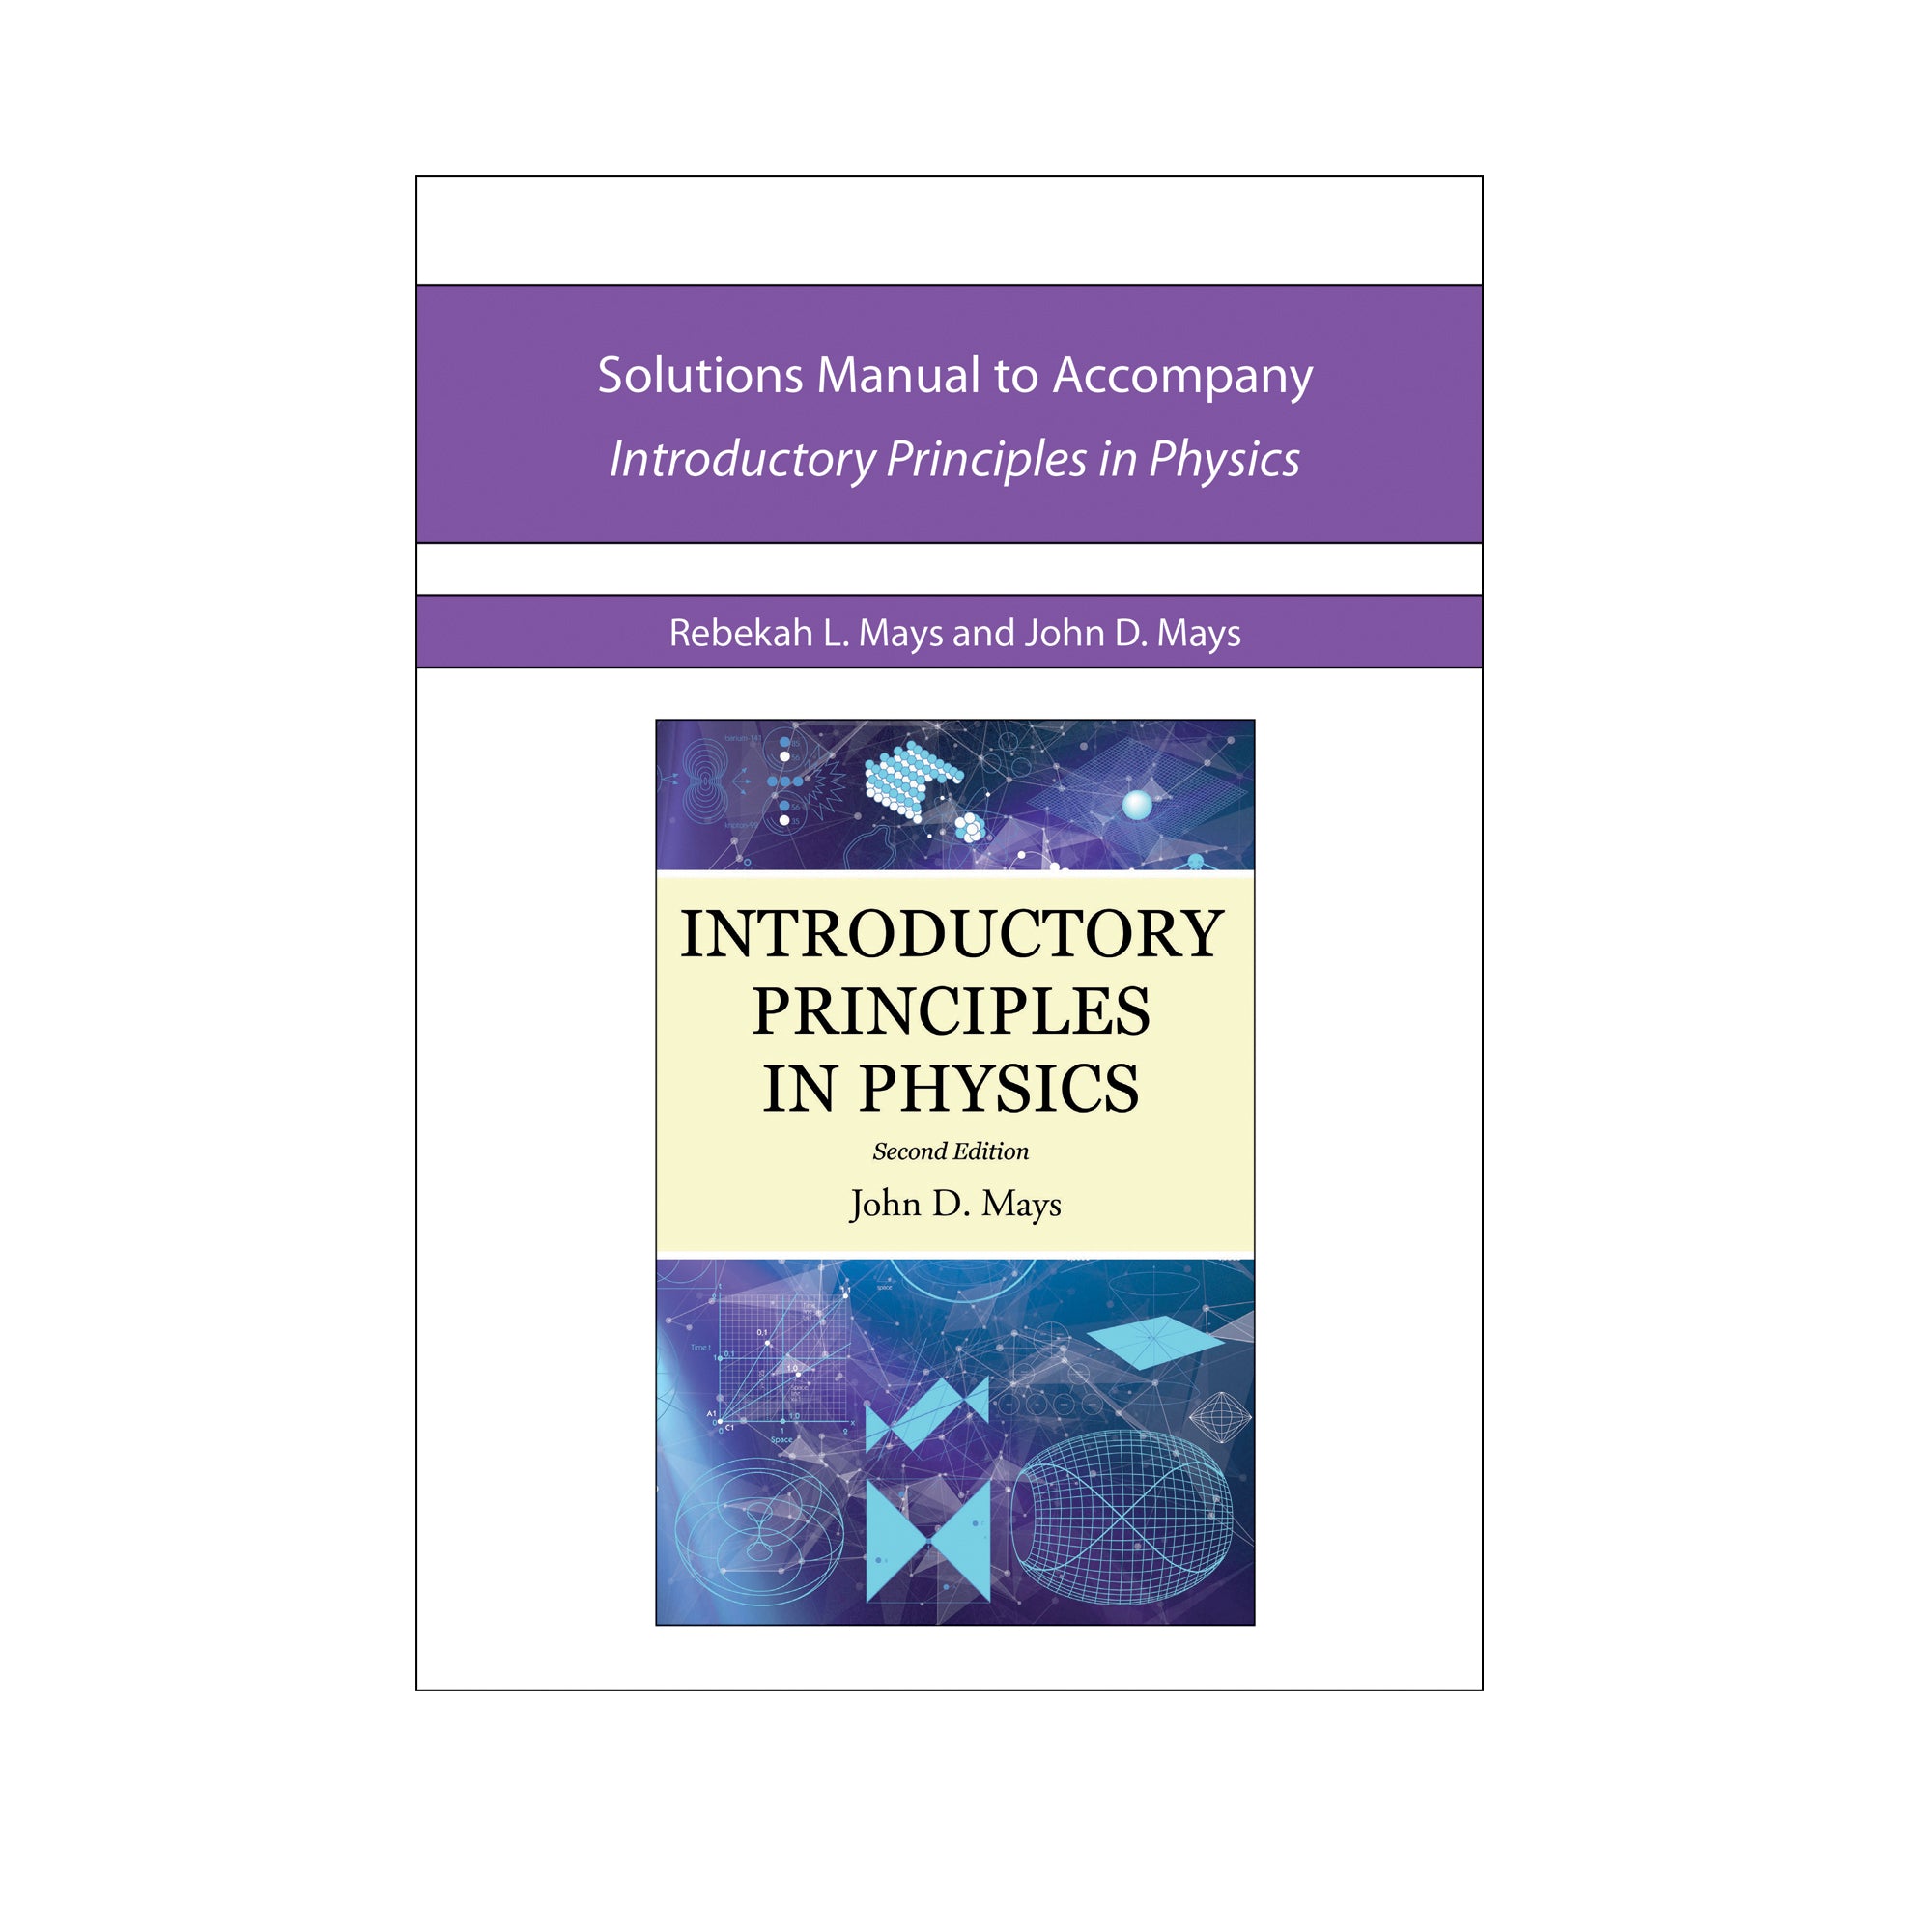 Introductory Principles in Physics Solutions Manual cover. Cover is white with purple stripes and an image of the Introductory Principles in Physics cover with shows a background of purples and blues with images of shapes and graphs in light blue and white. In the middle is a cream color with the title and author.